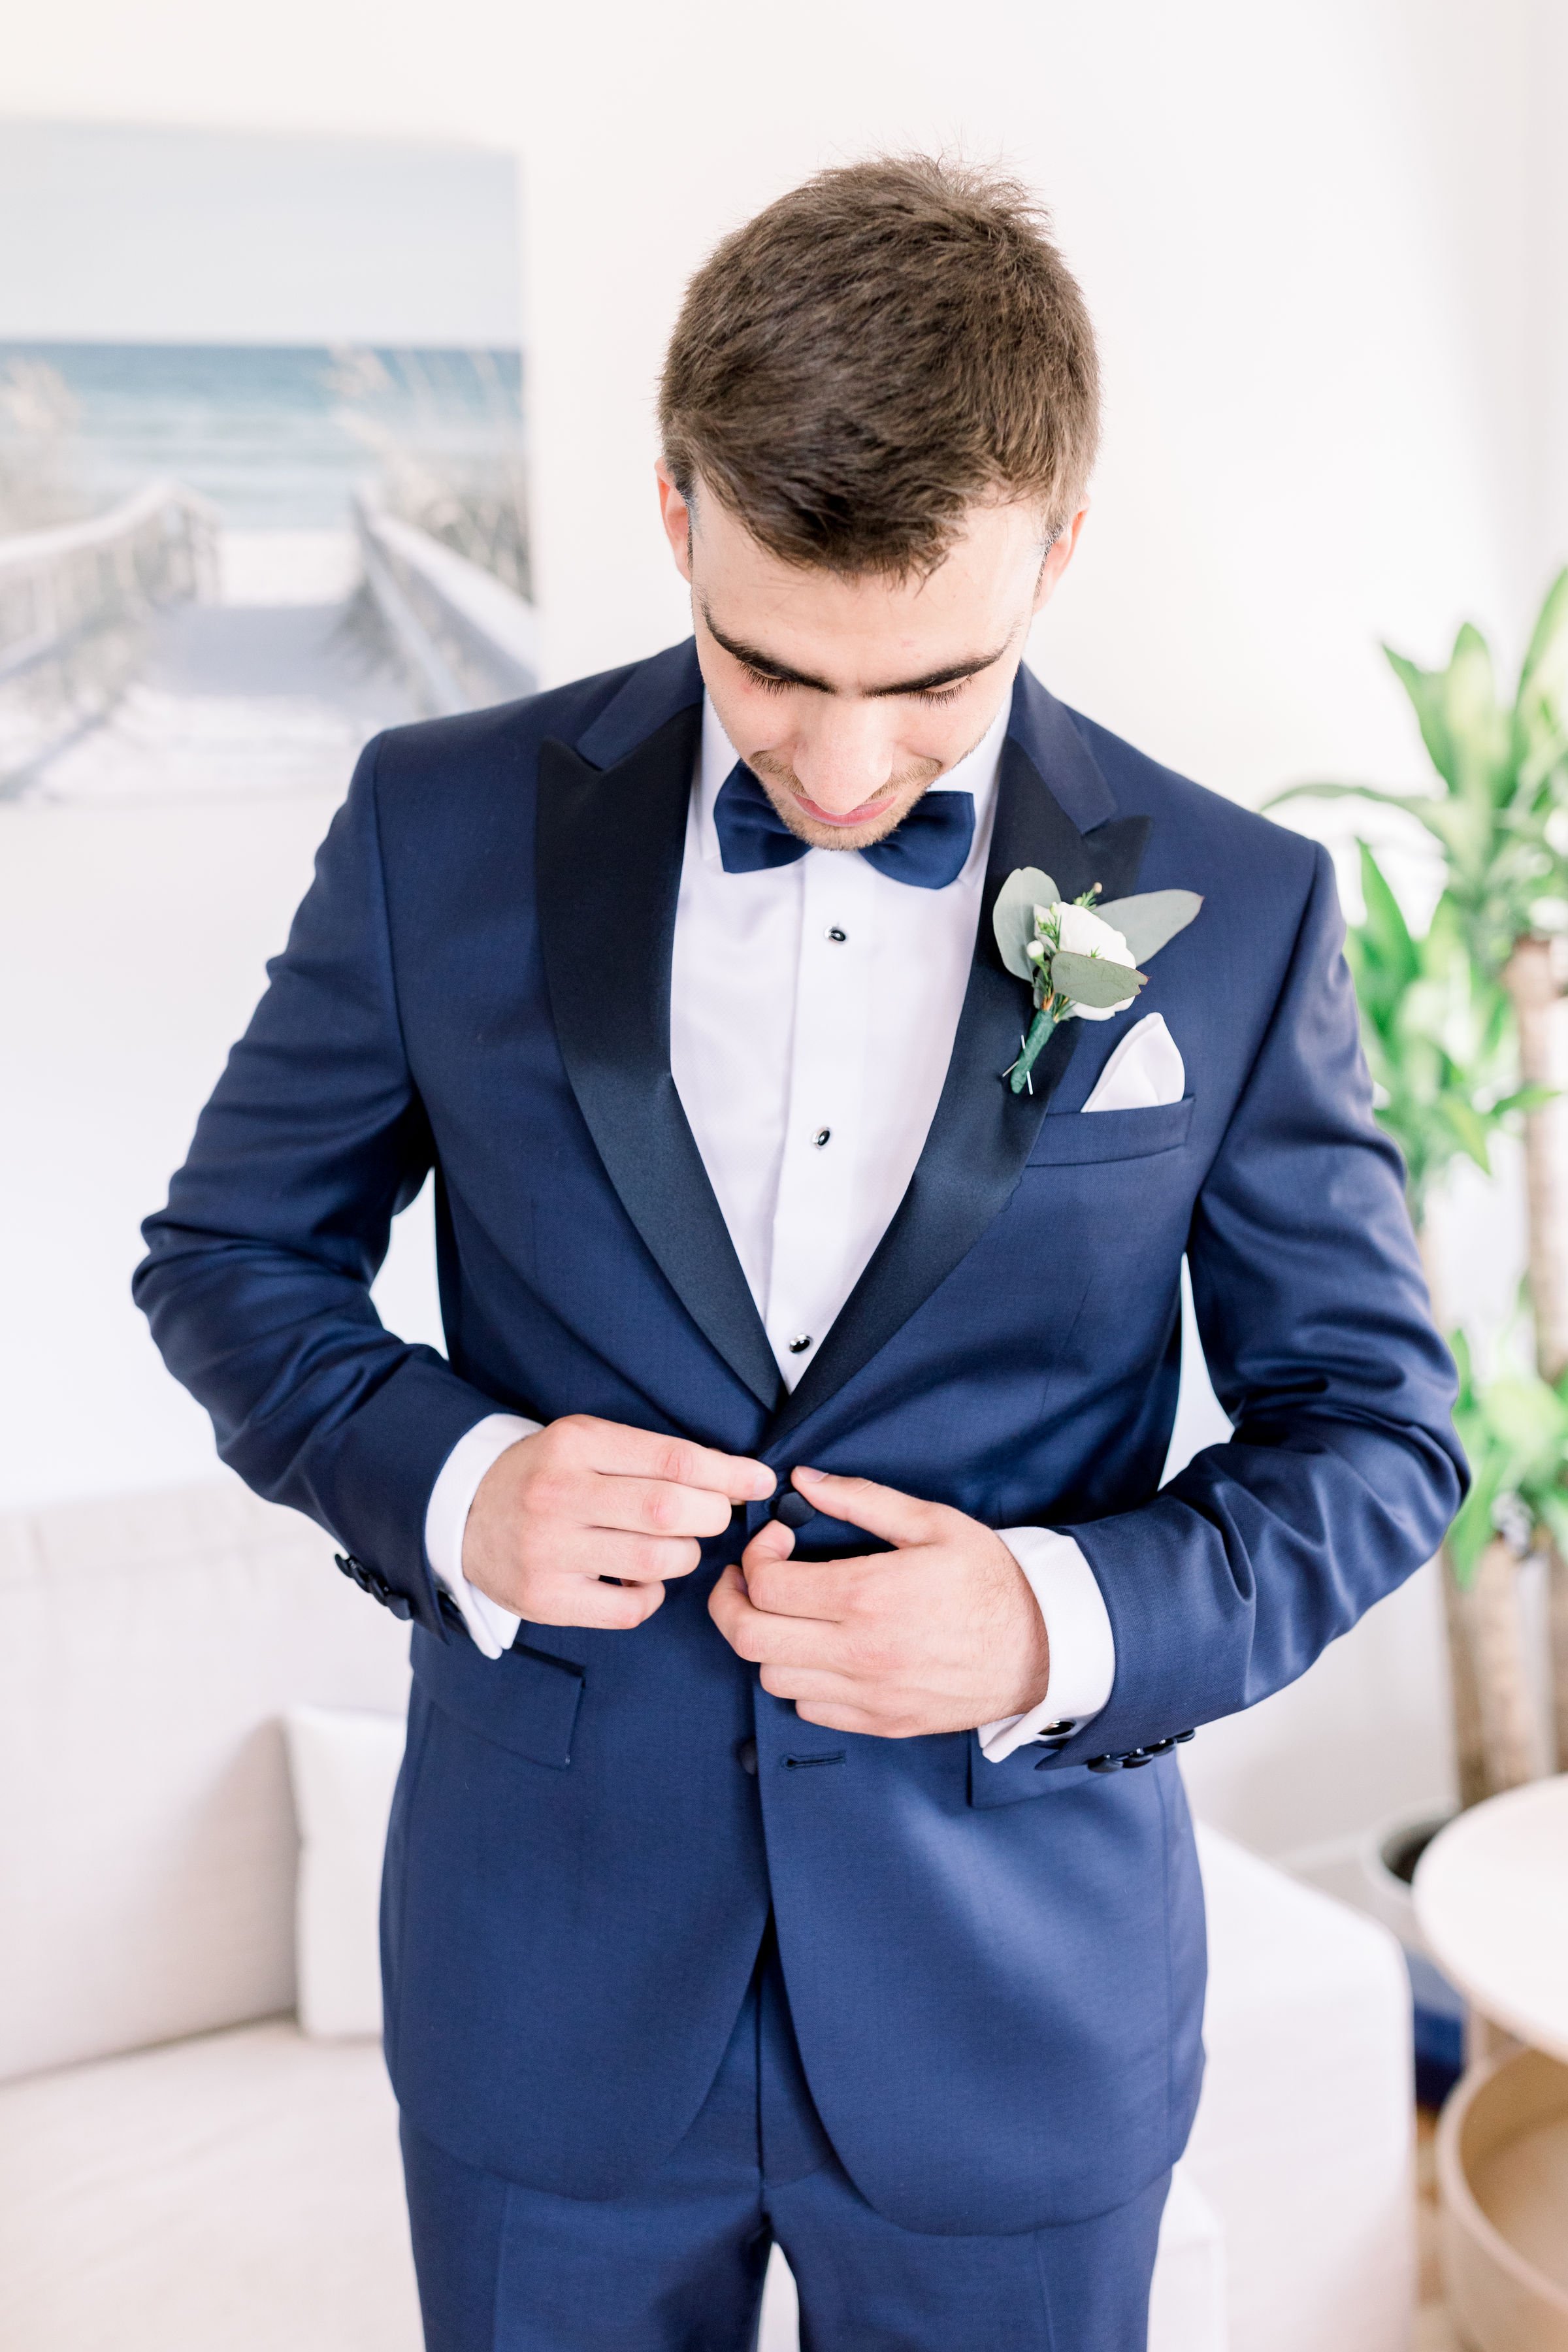  Groom in a navy suit buttons his suitcoat was captured at Evermore Weddings and Events by Chelsea Mason Photography. Navy bowtie #Chelseamasonphotography #Chelseamasonweddings #Onatarioweddings #EvermoreweddingsAlmonte #Ontarioweddingphotographers 